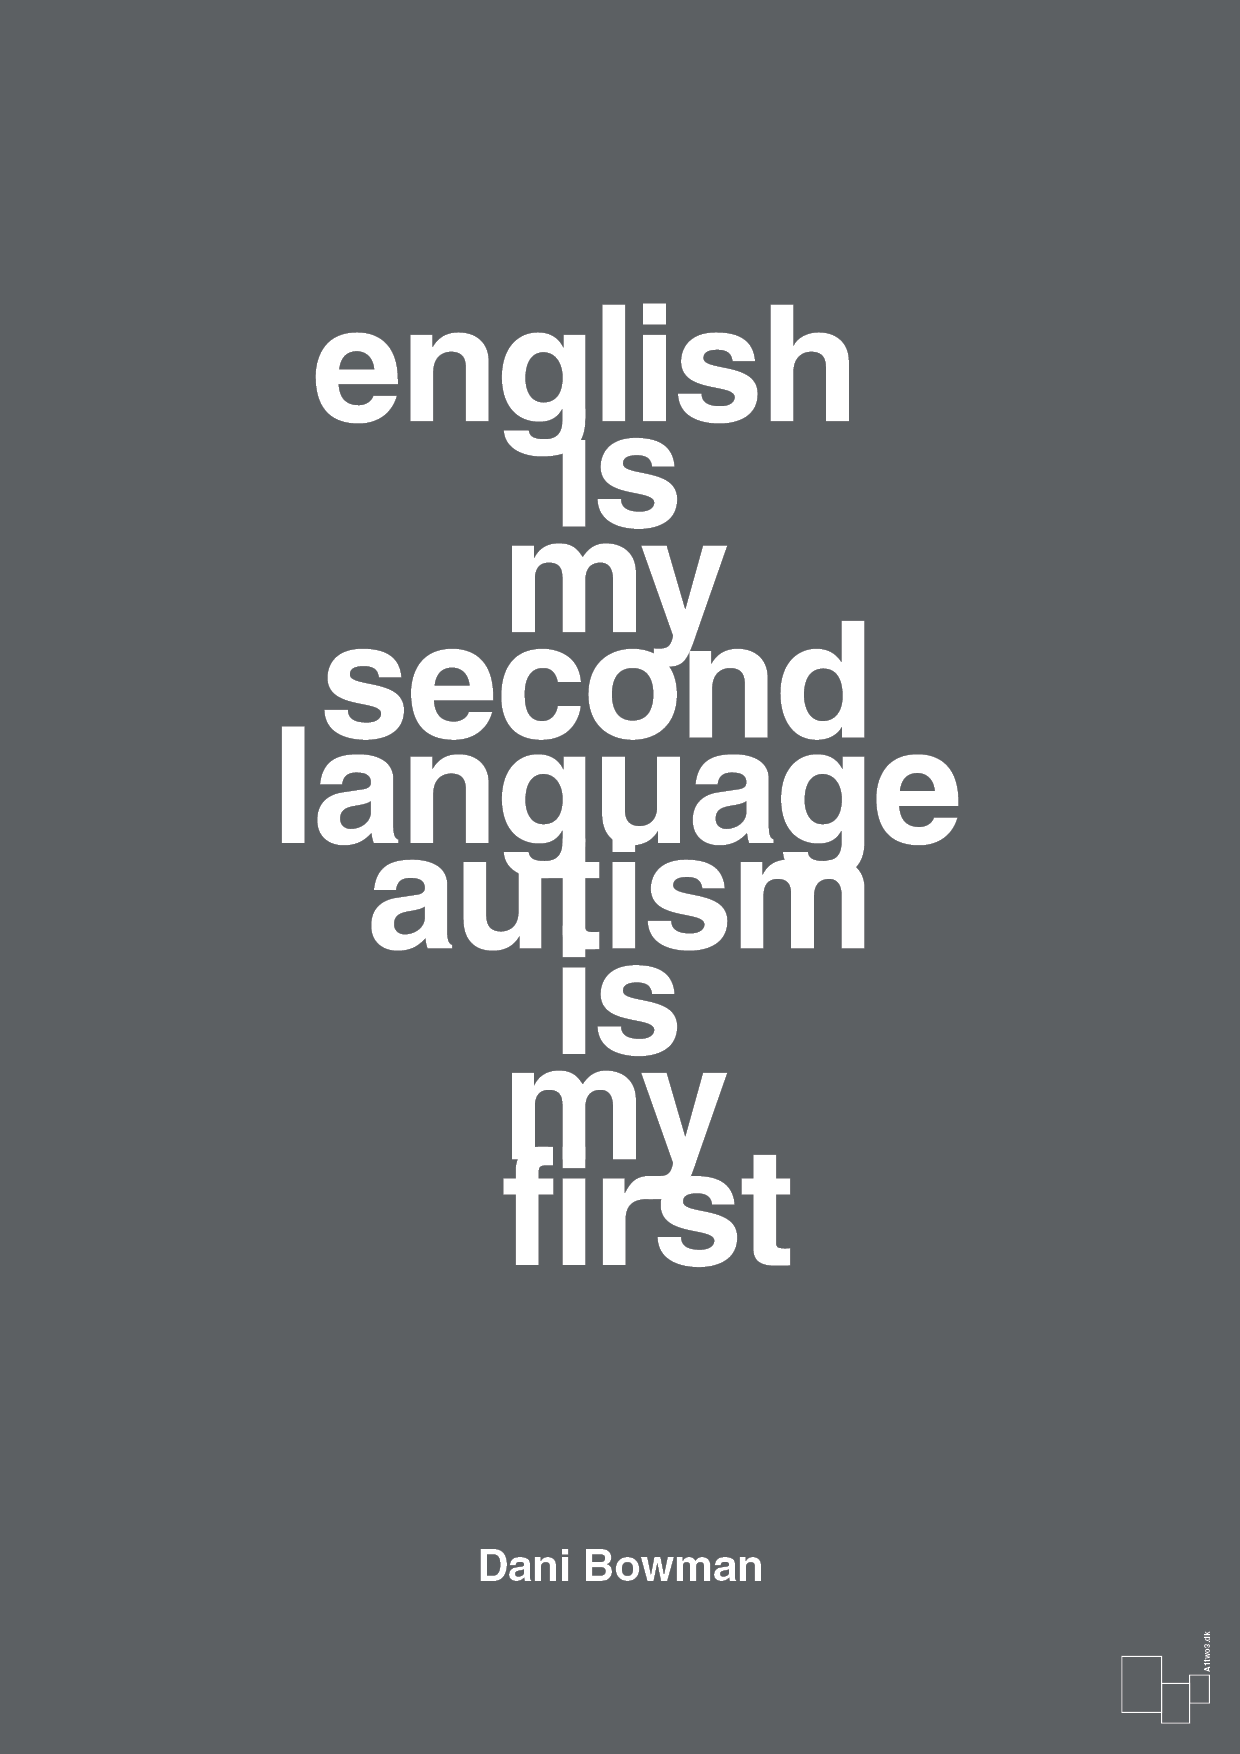 english is my second language autism is my first - Plakat med Samfund i Graphic Charcoal